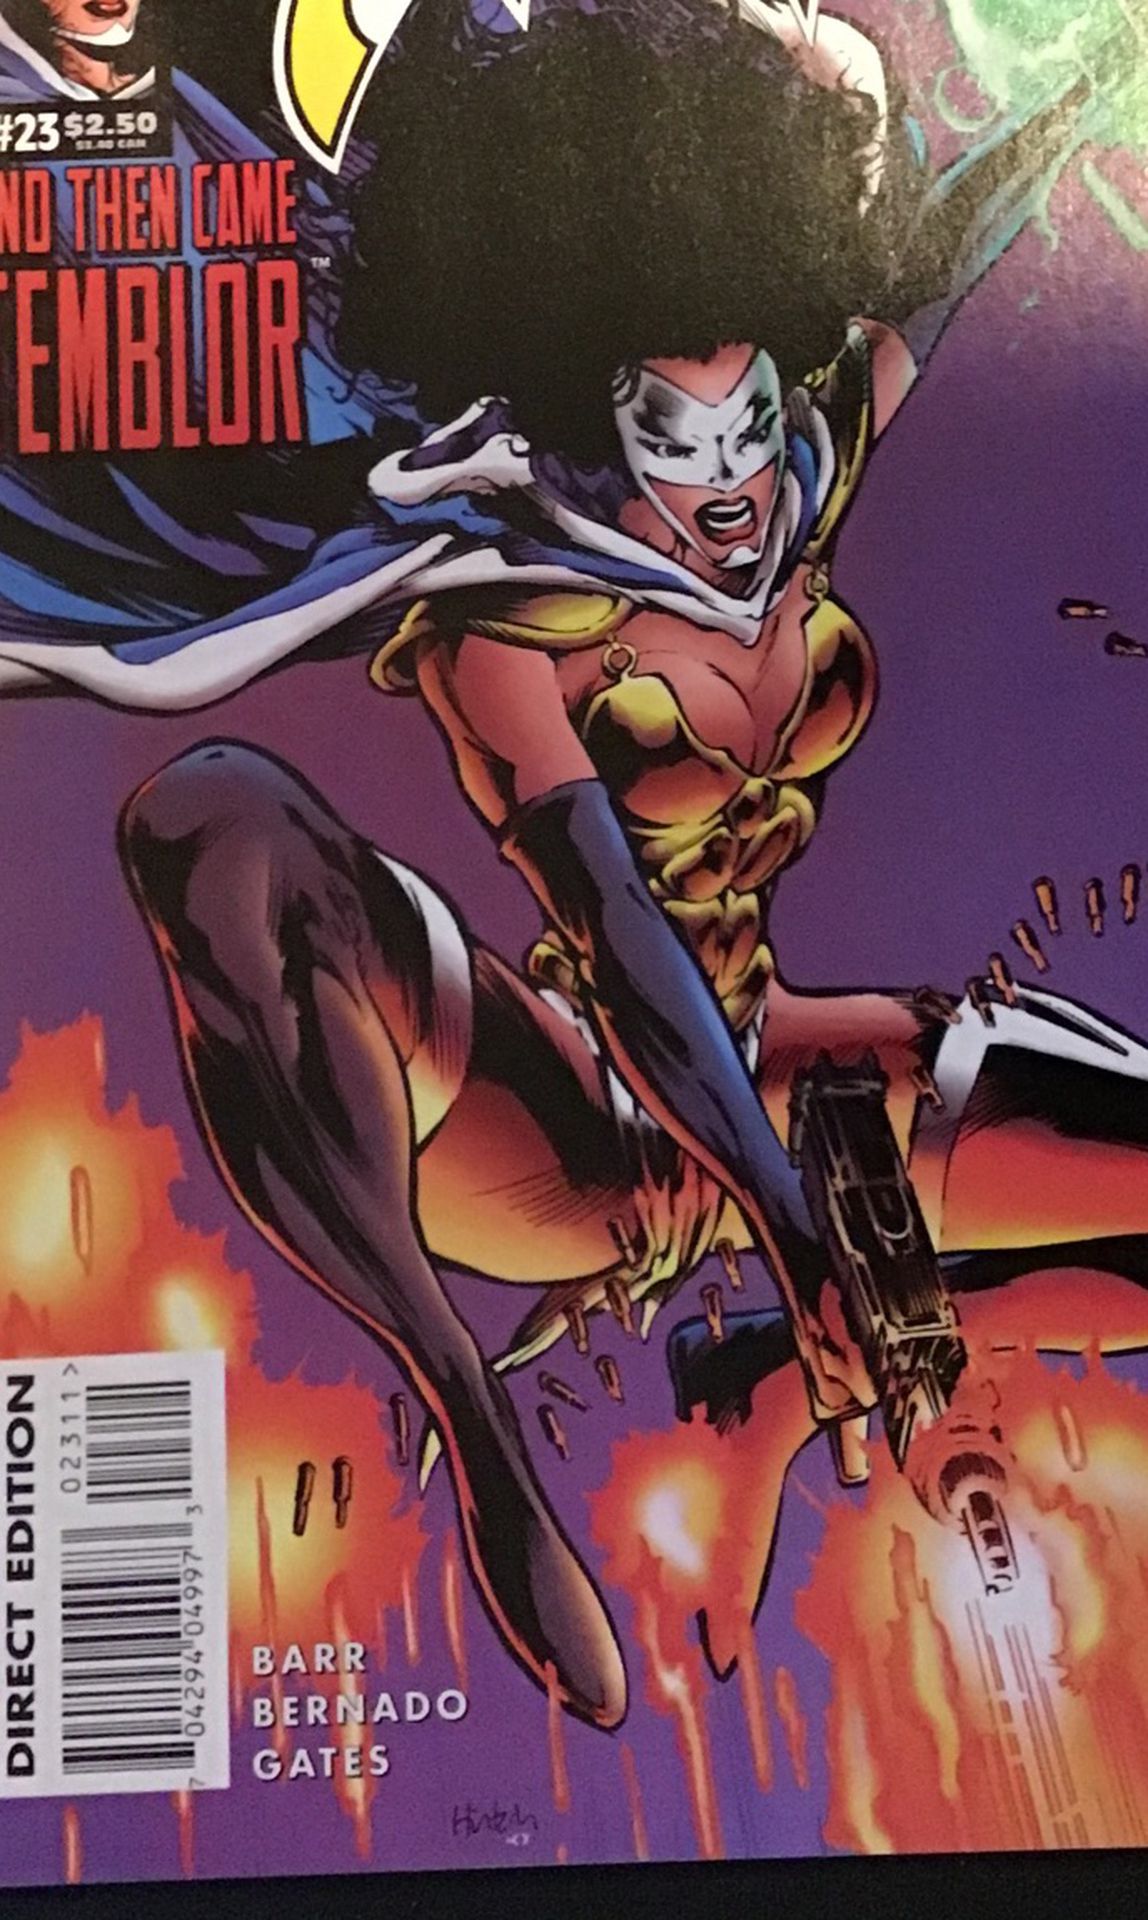 COMIC BOOK—MANTRA, Vol. 1, Issue #23, July 1995